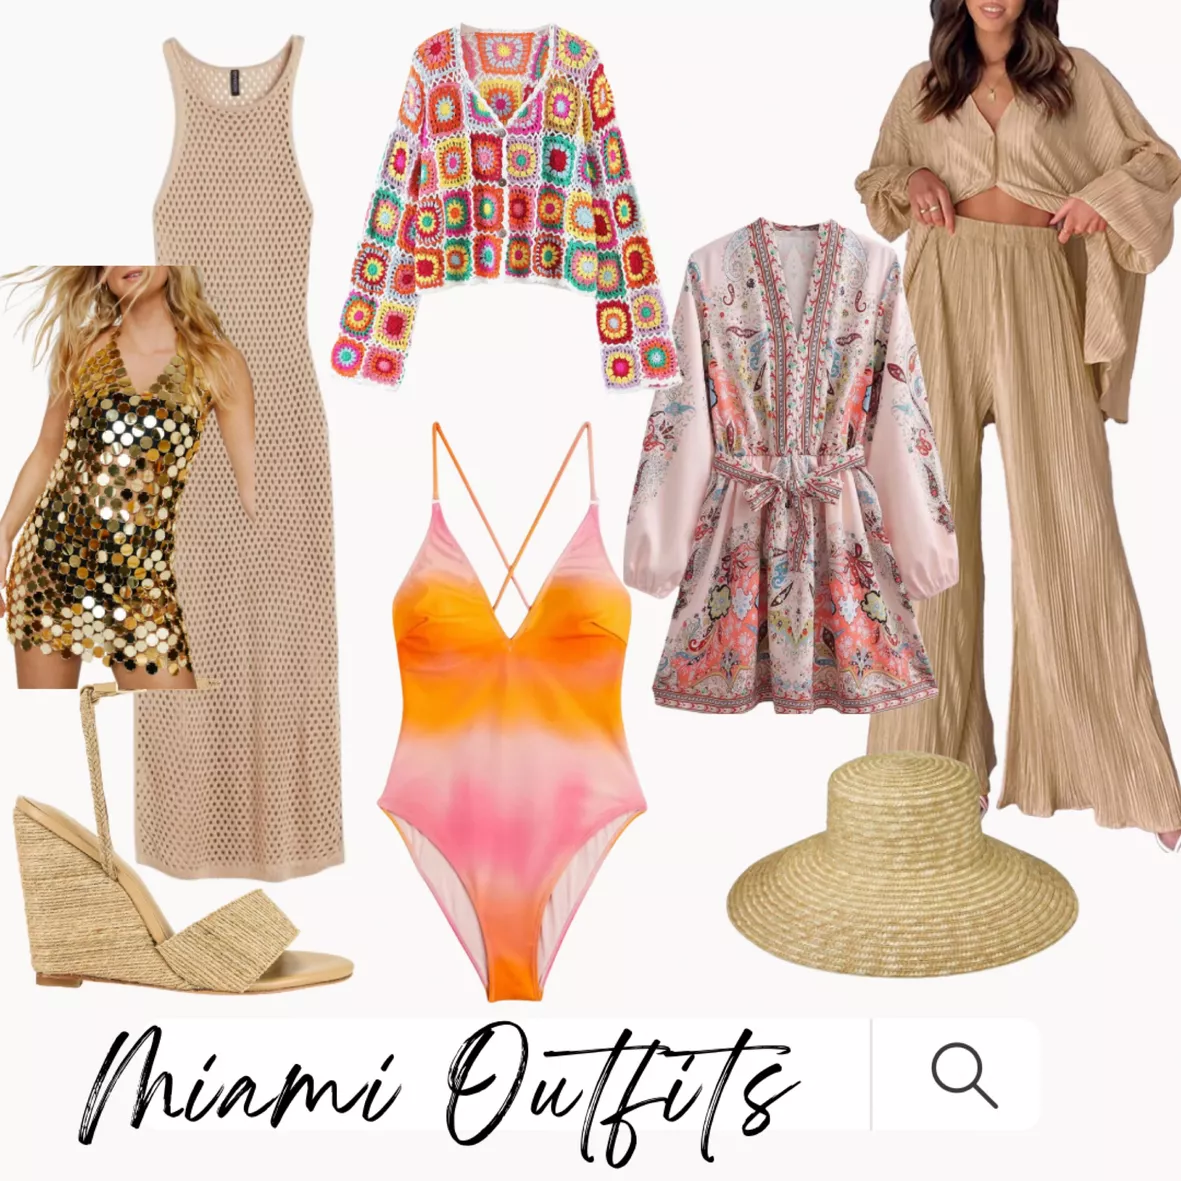 beach outfits polyvore